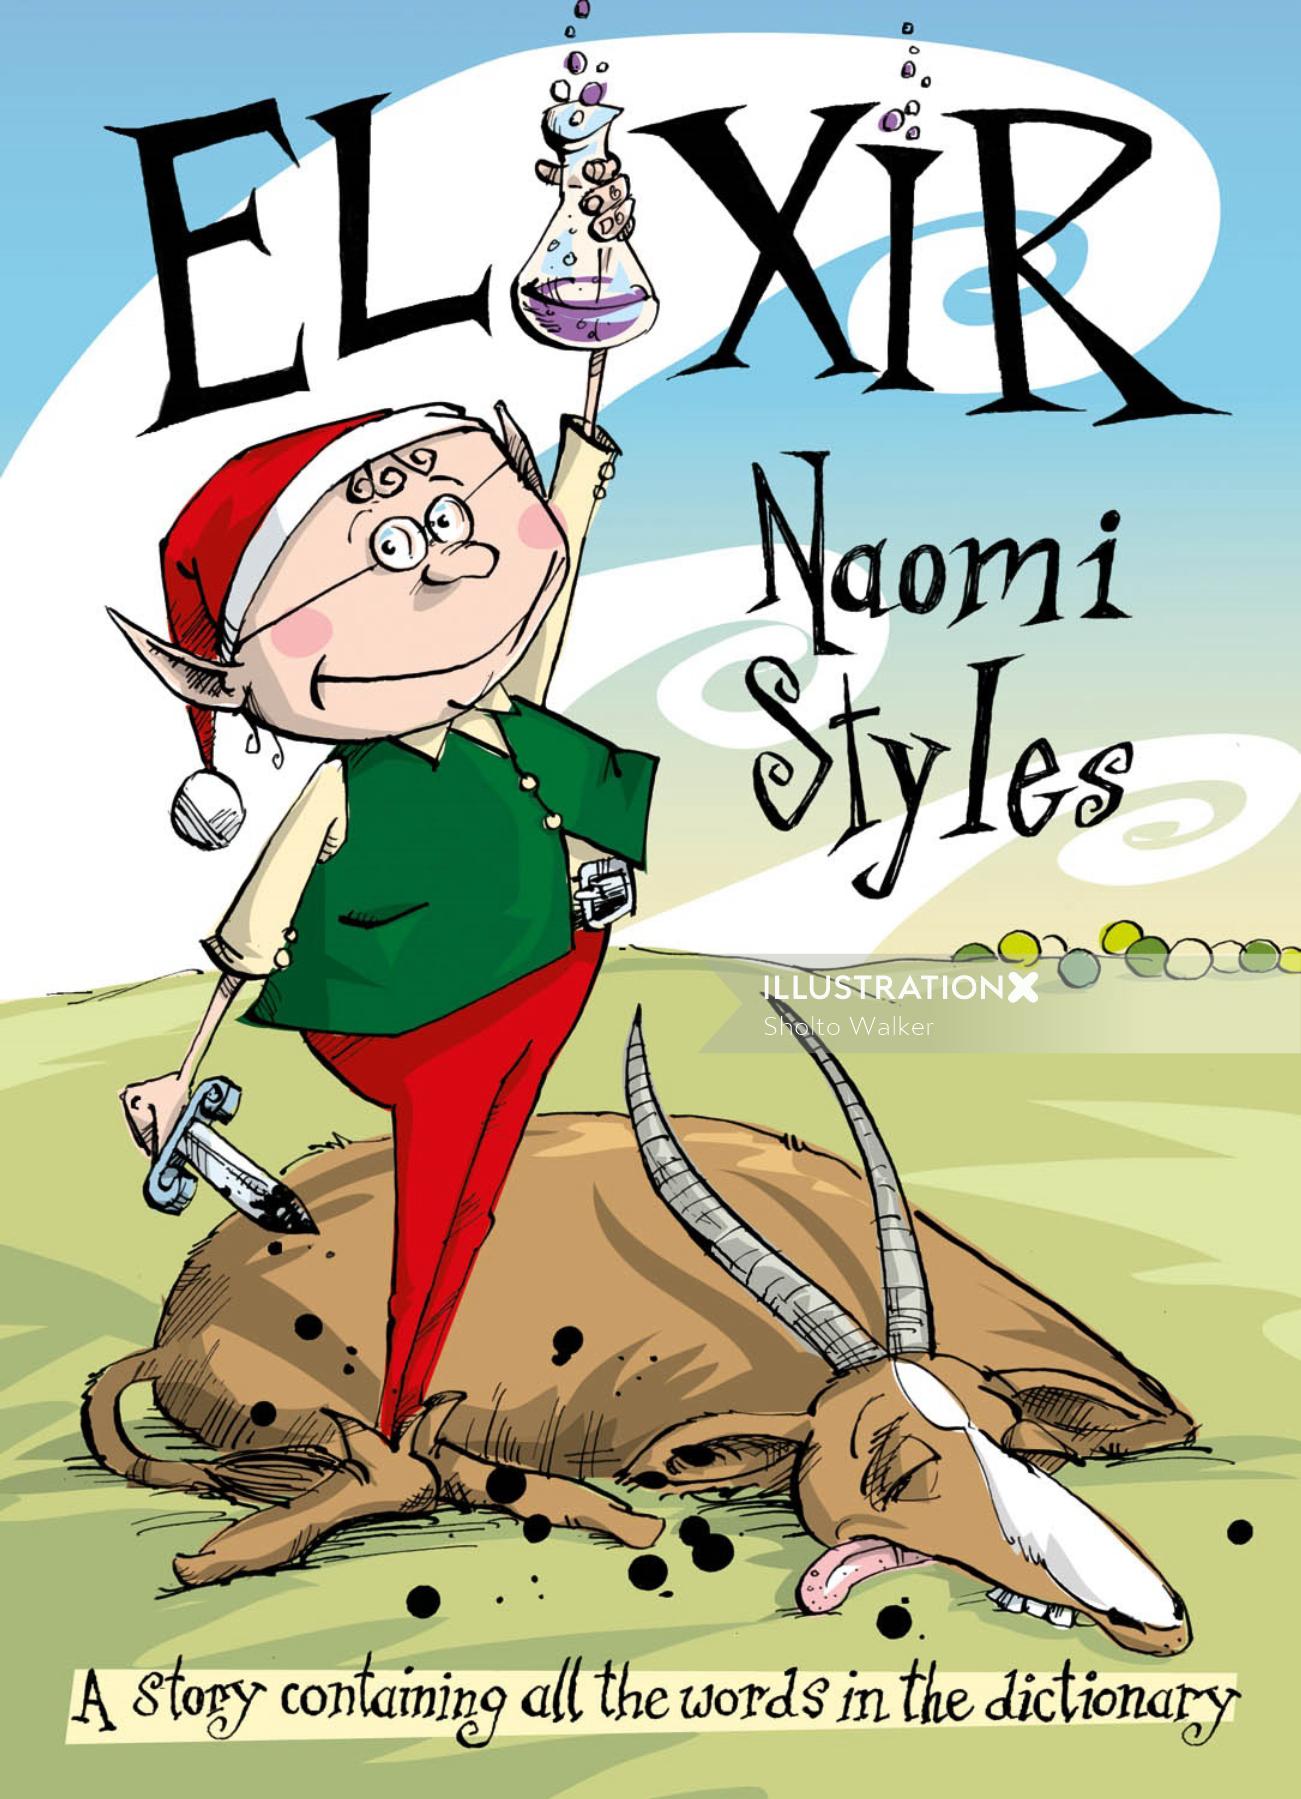 Cartoon character illustration for Elixir book cover